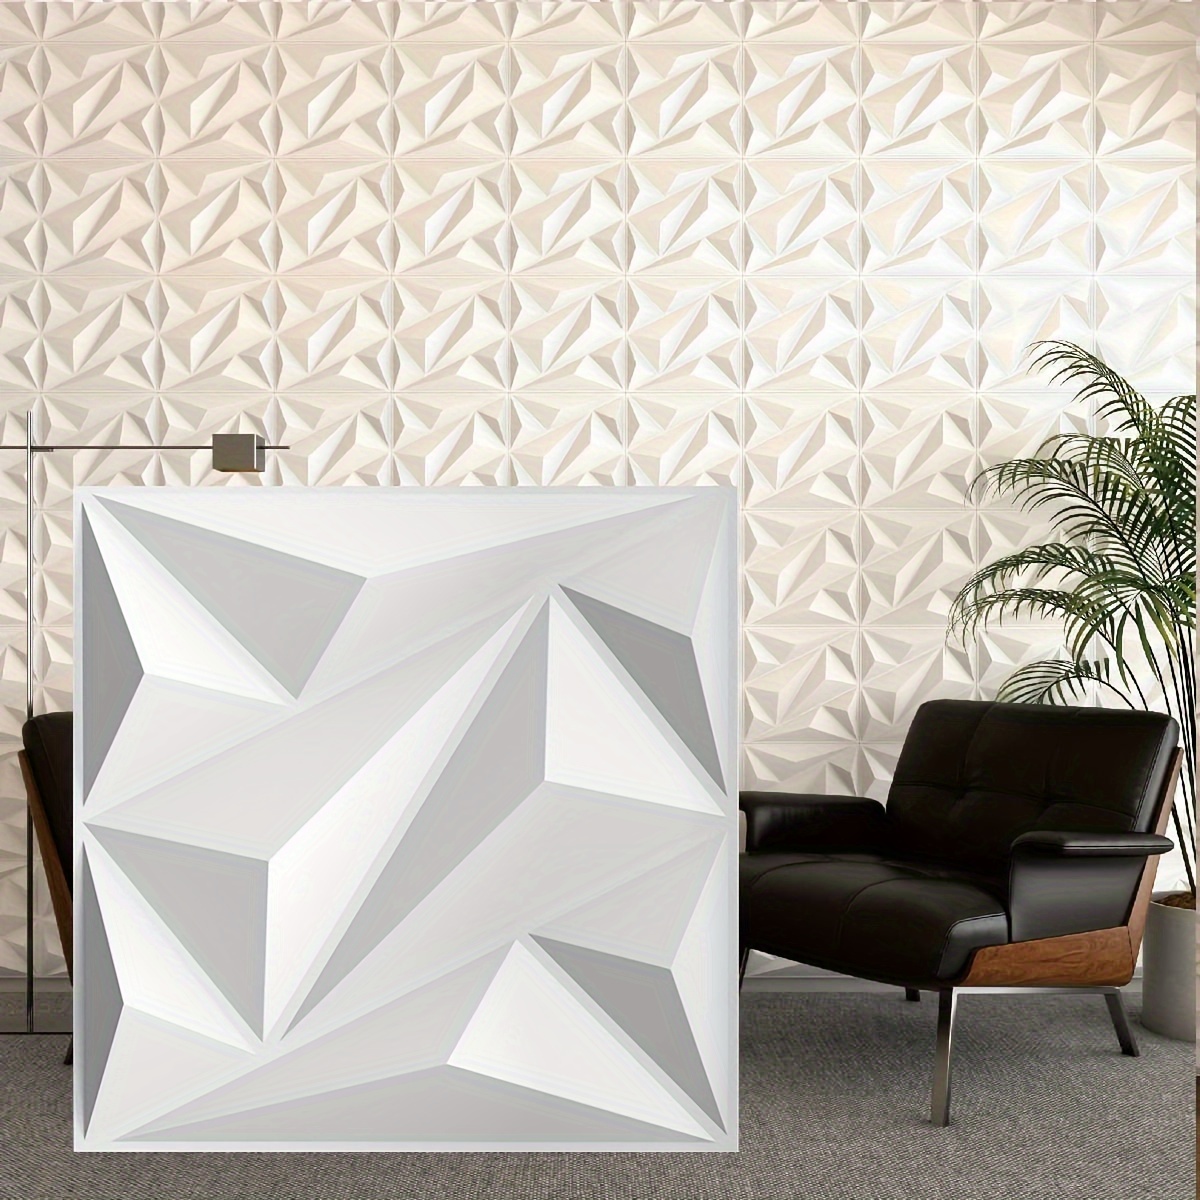 

30pcs 3d Diamond-shaped Textured Wall Sticker, Waterproof Panel For Kitchen, Living Room, Bathroom, Corridor, Office, Home And Dormitory Decor